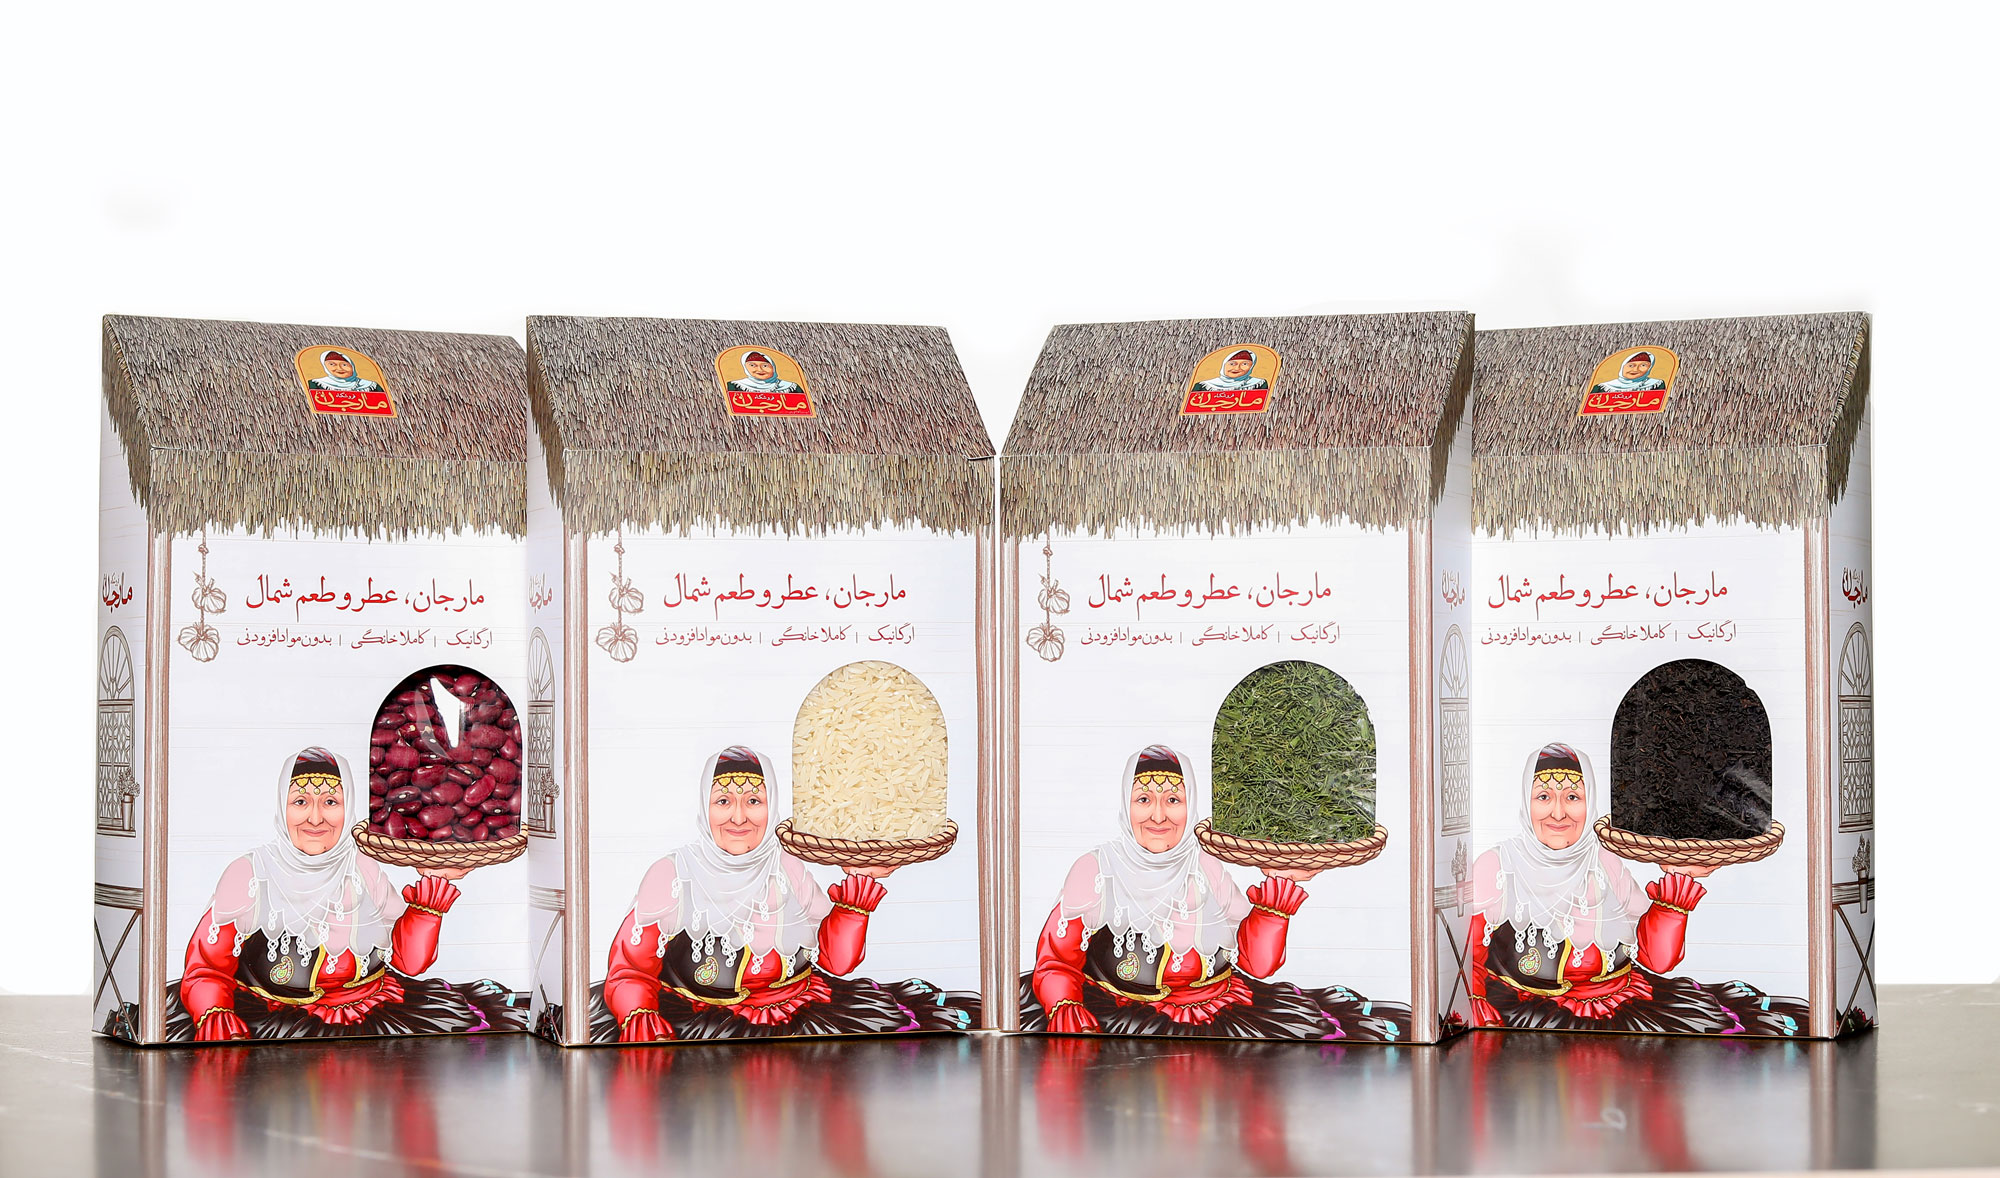 Marjan Brand Packaging and Labeling Redesign: Evolving Tradition with Modern Design